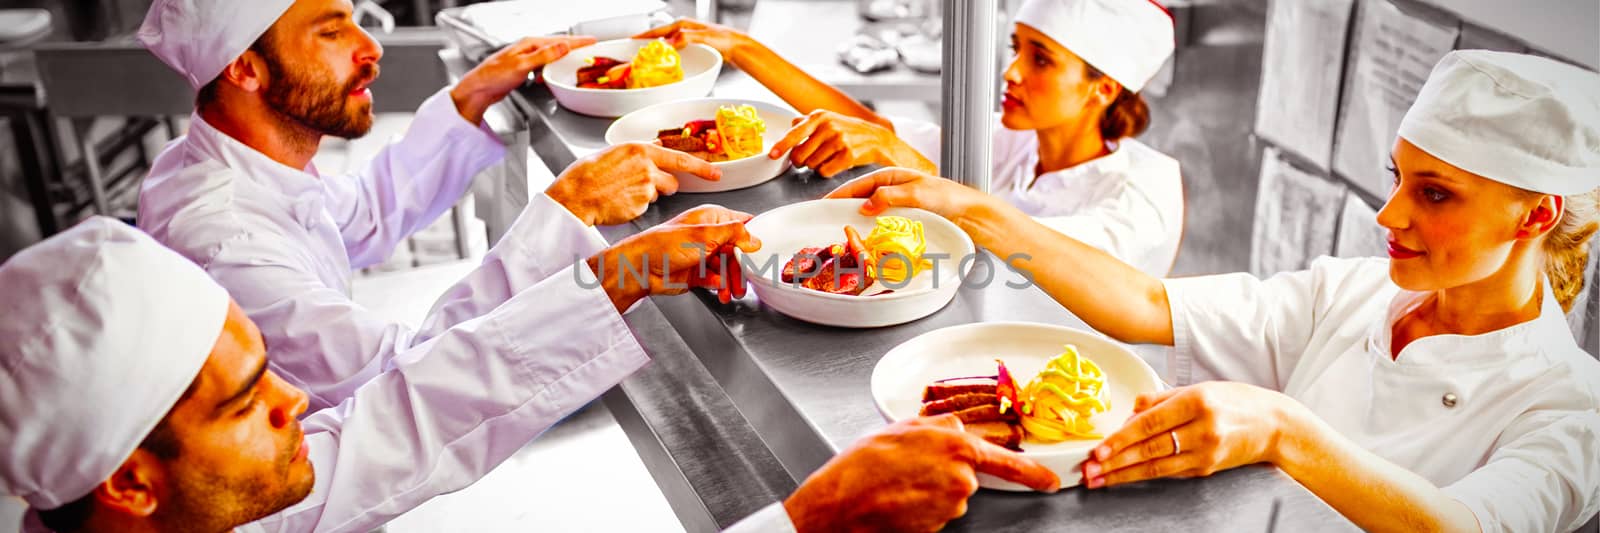 Chefs passing ready food to waiter at order station by Wavebreakmedia